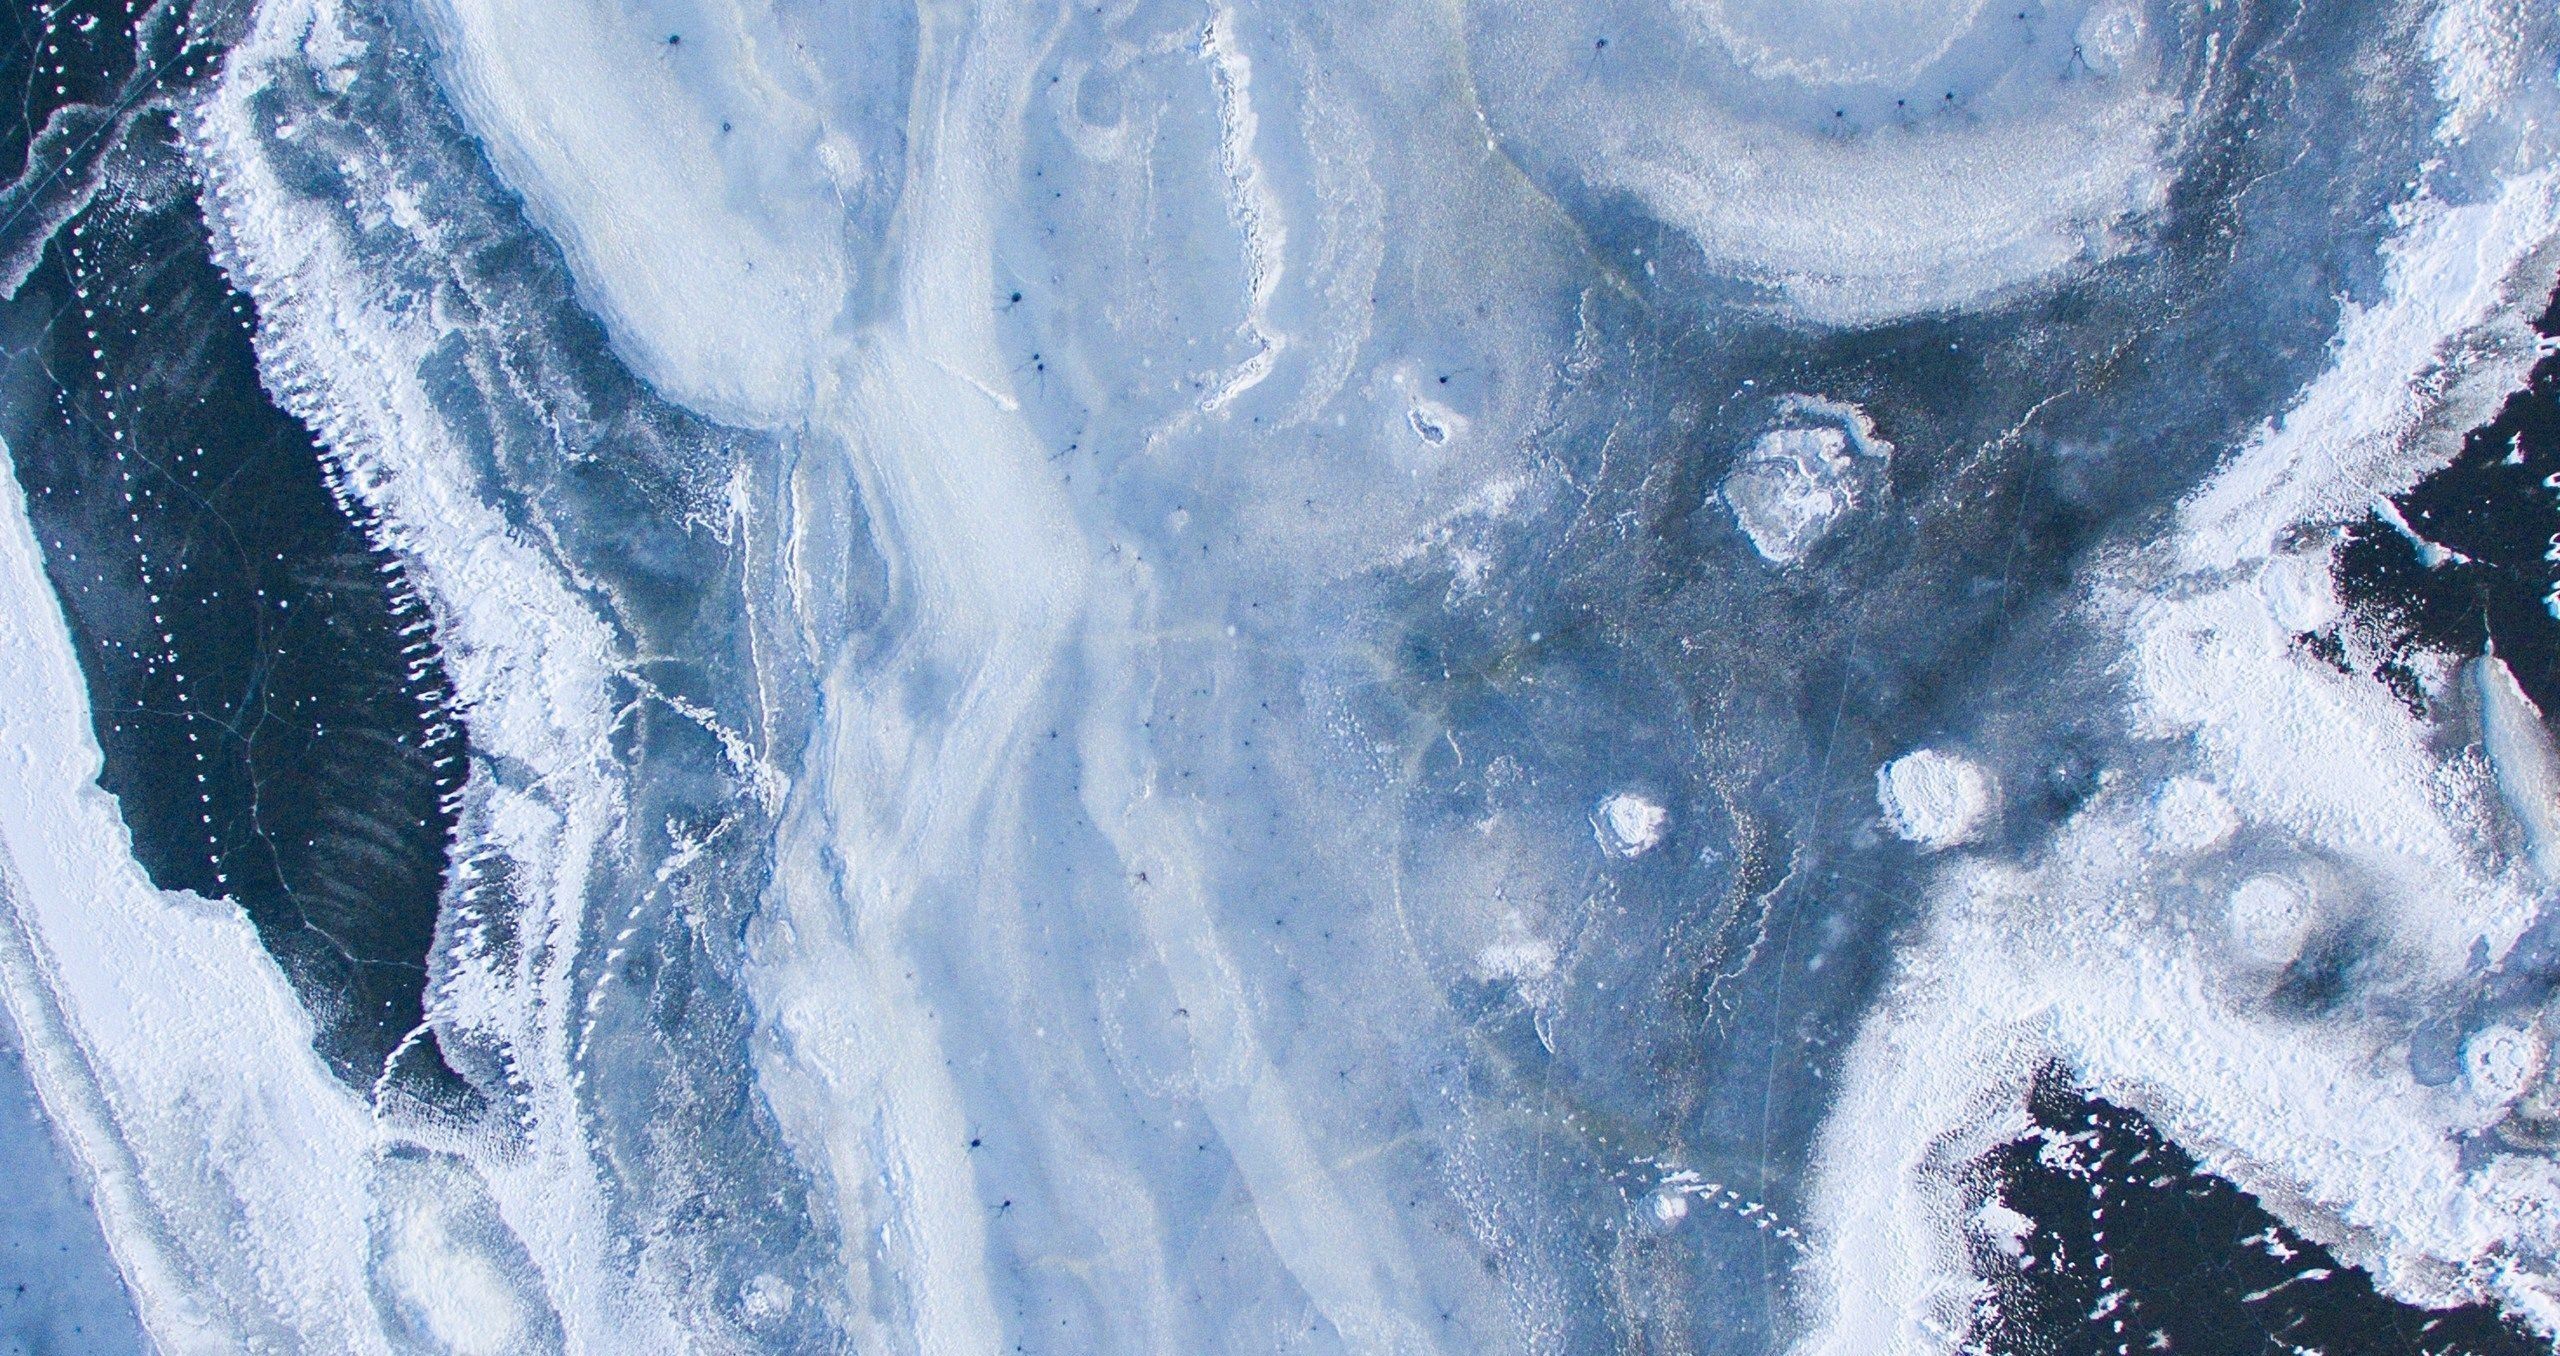 A satellite image of ice on a lake - Marble